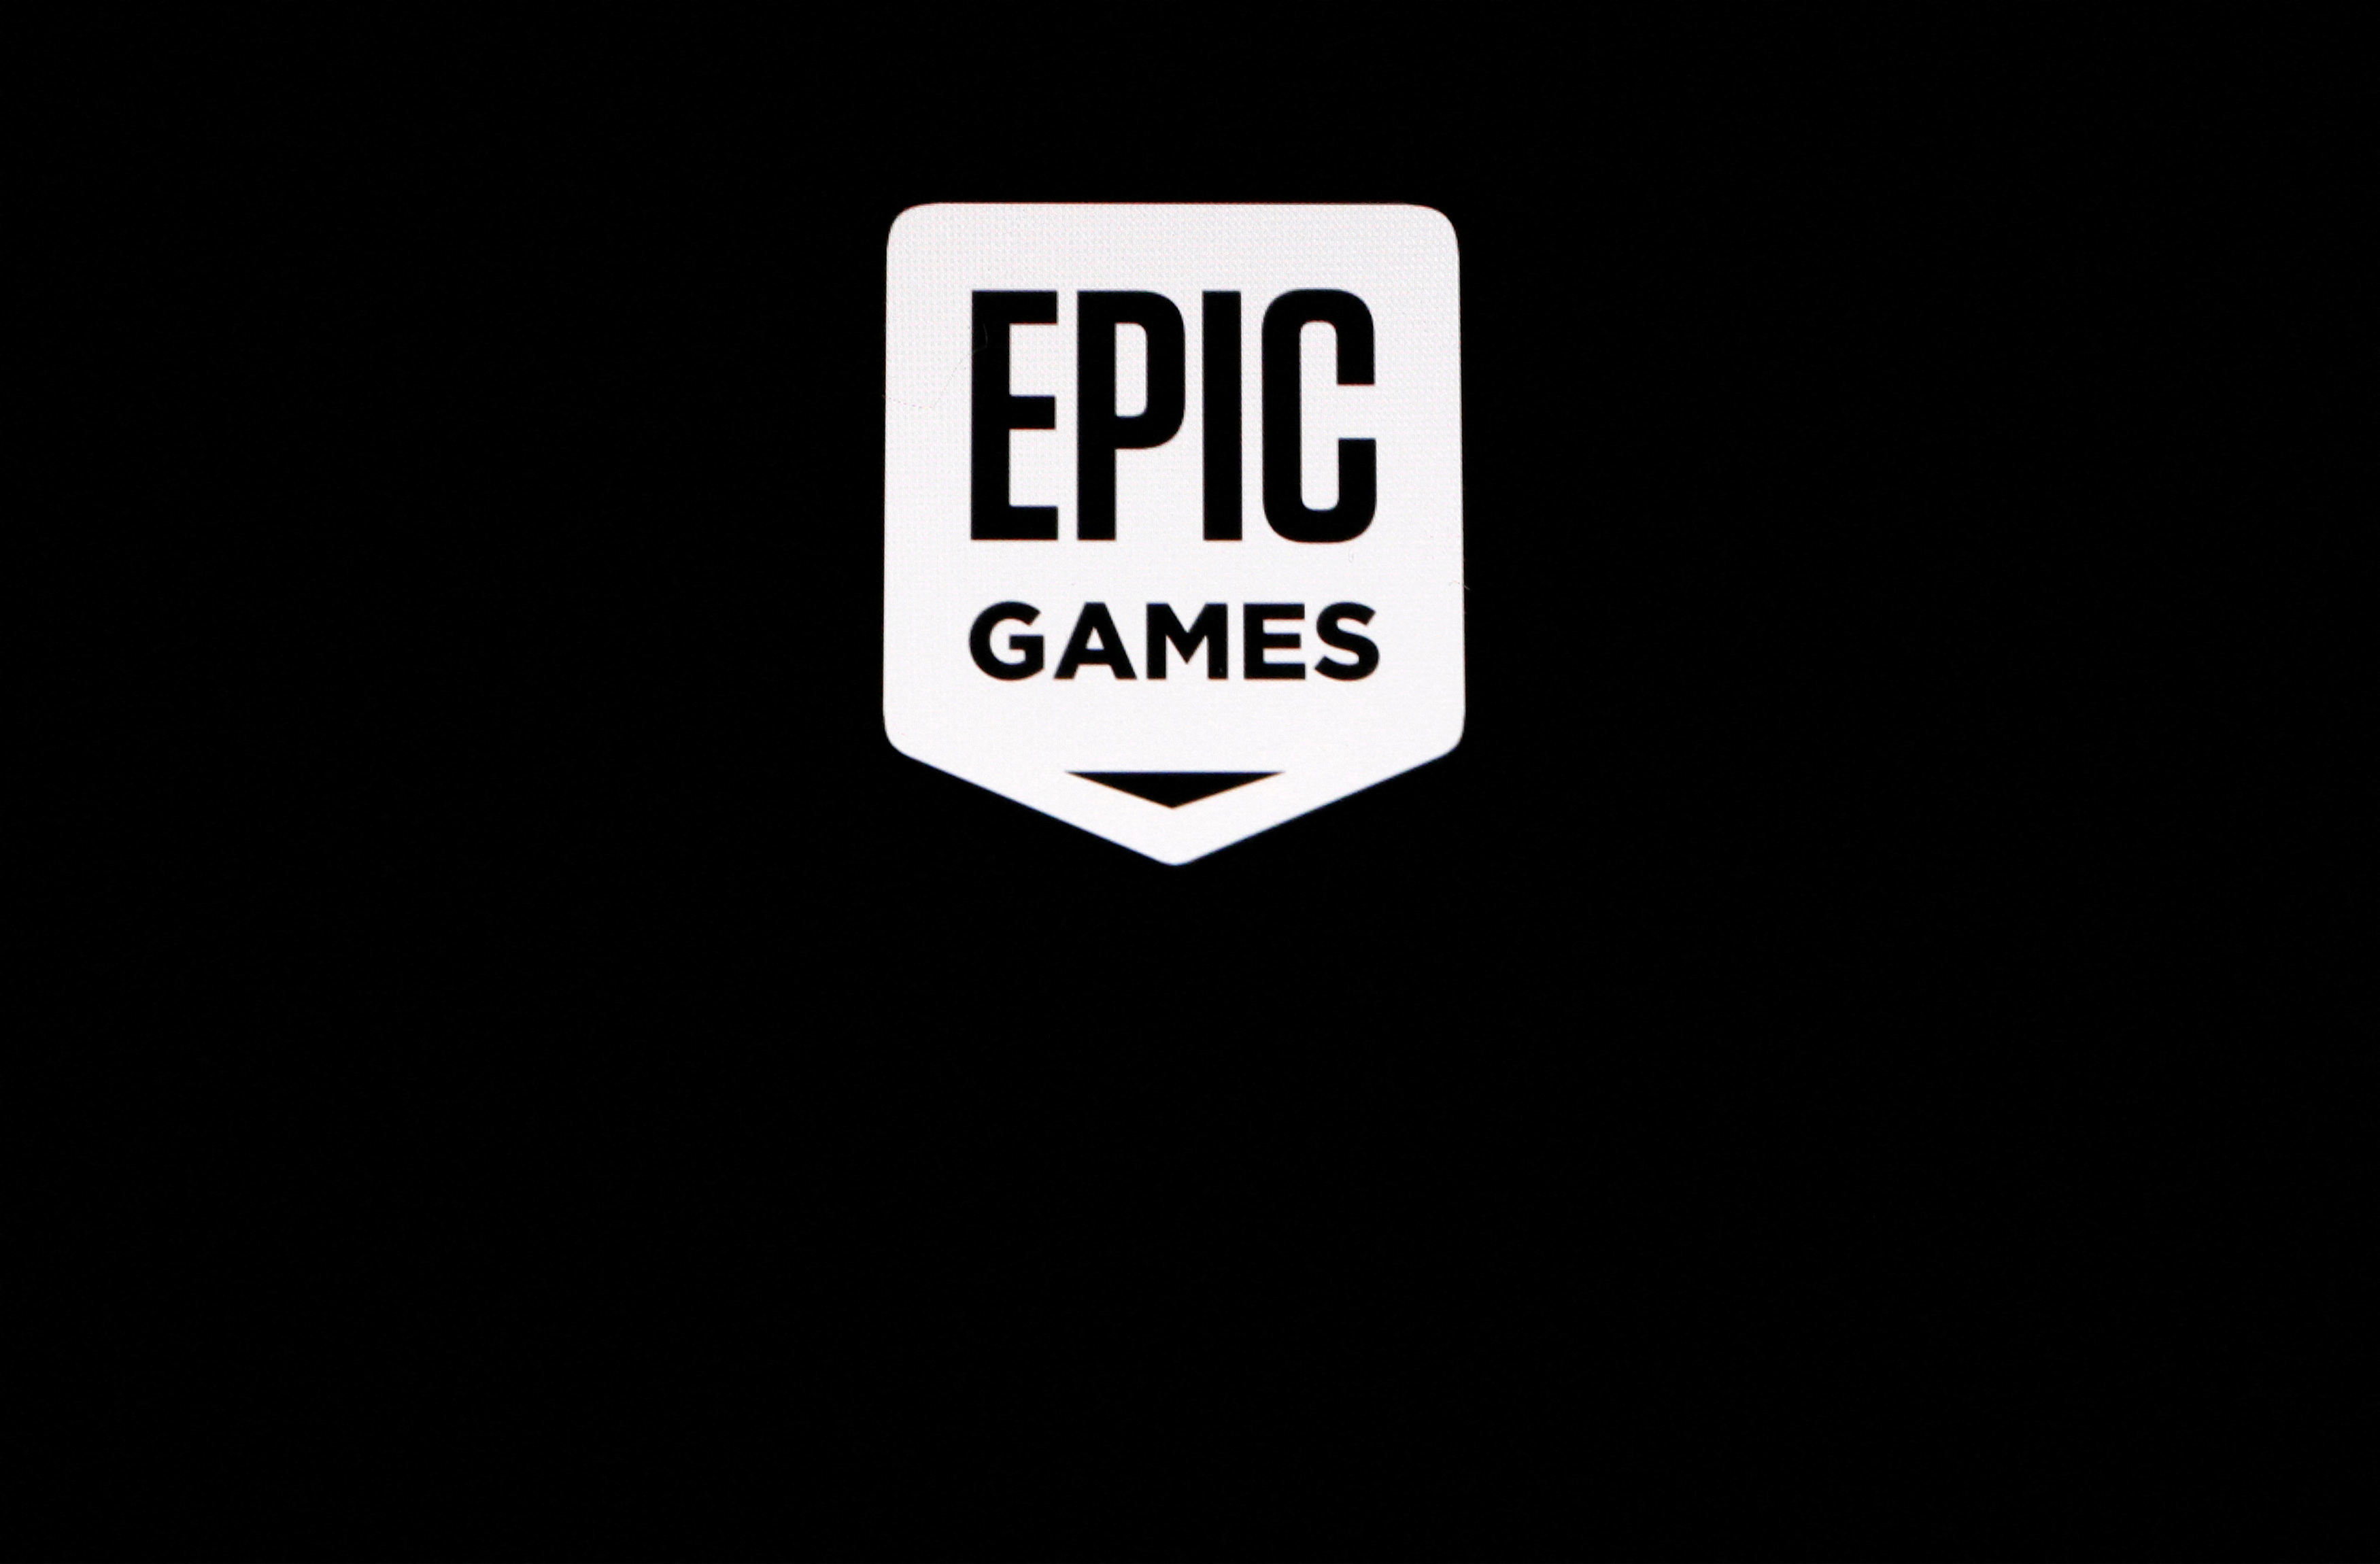 The Epic Games logo, maker of the popular video game "Fortnite", is pictured on a screen